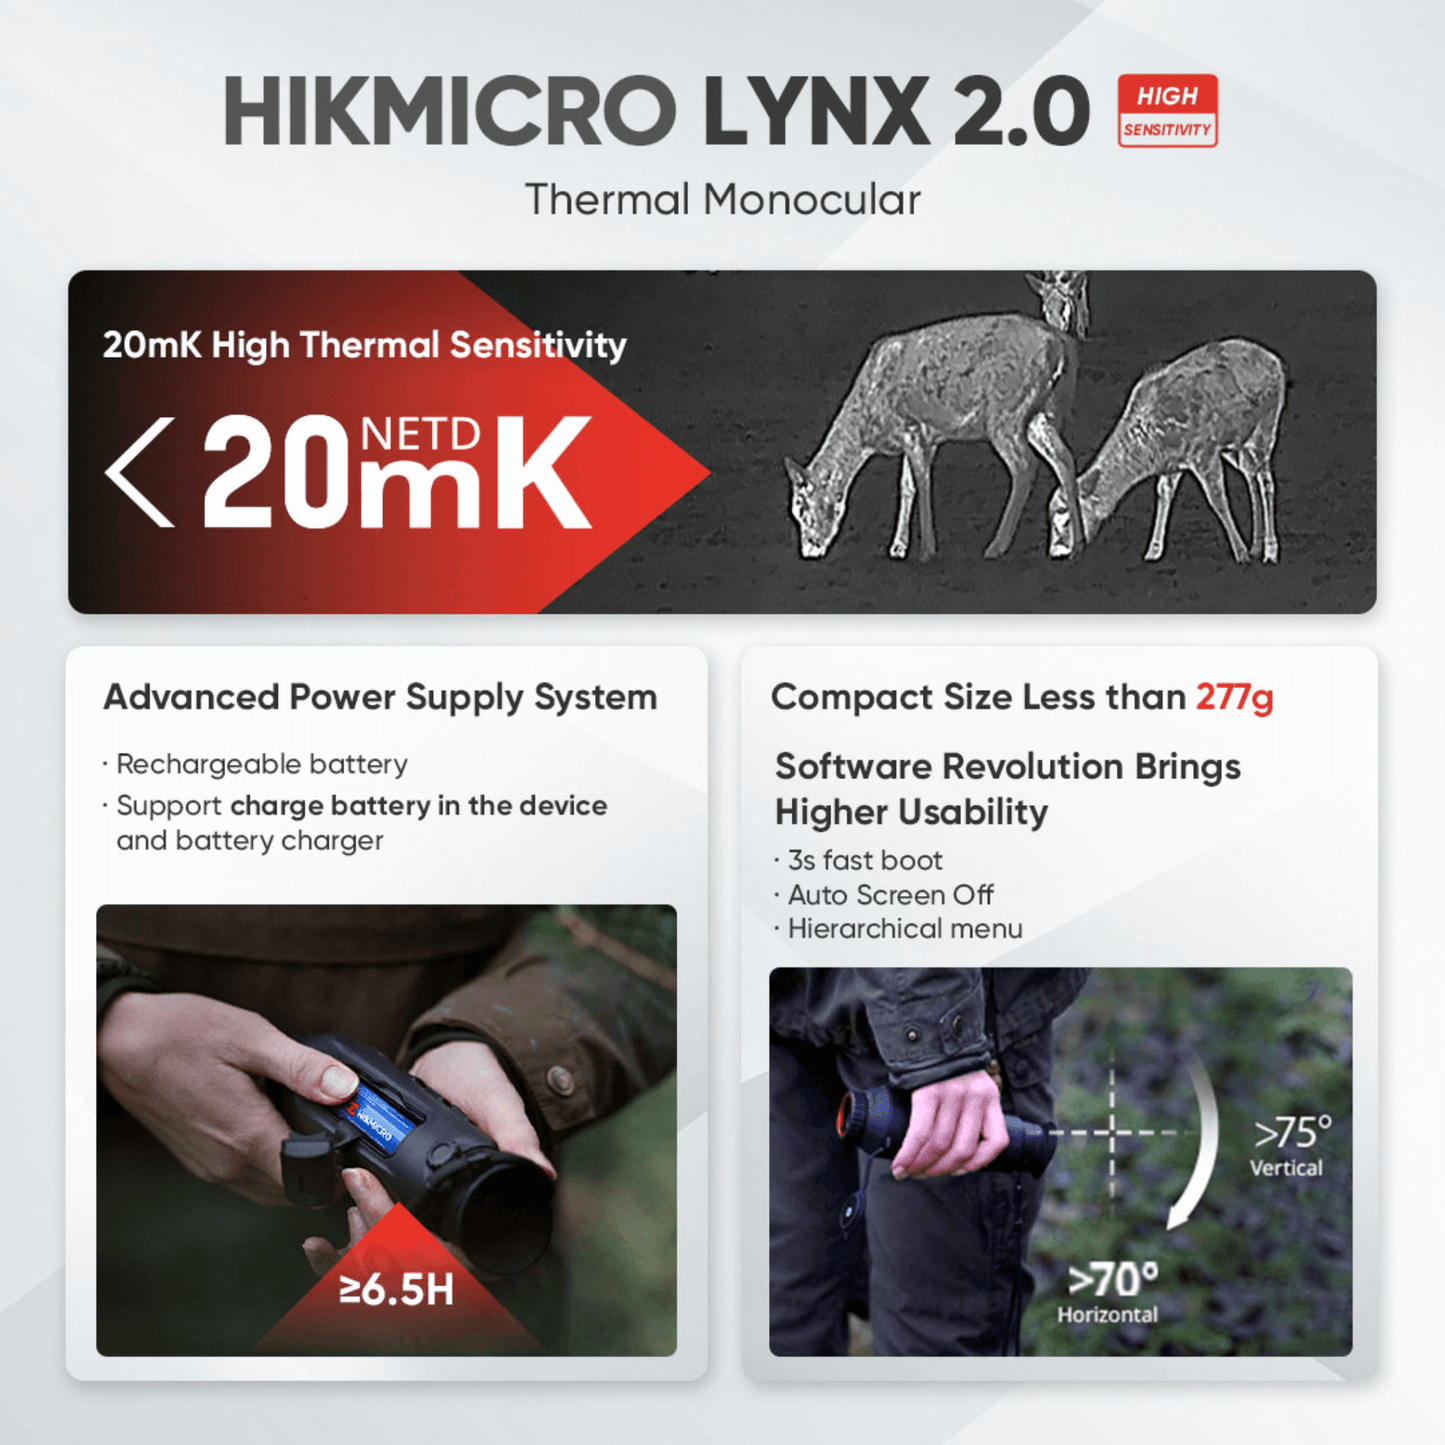 HikMicro Lynx LH15 2.0 additional features